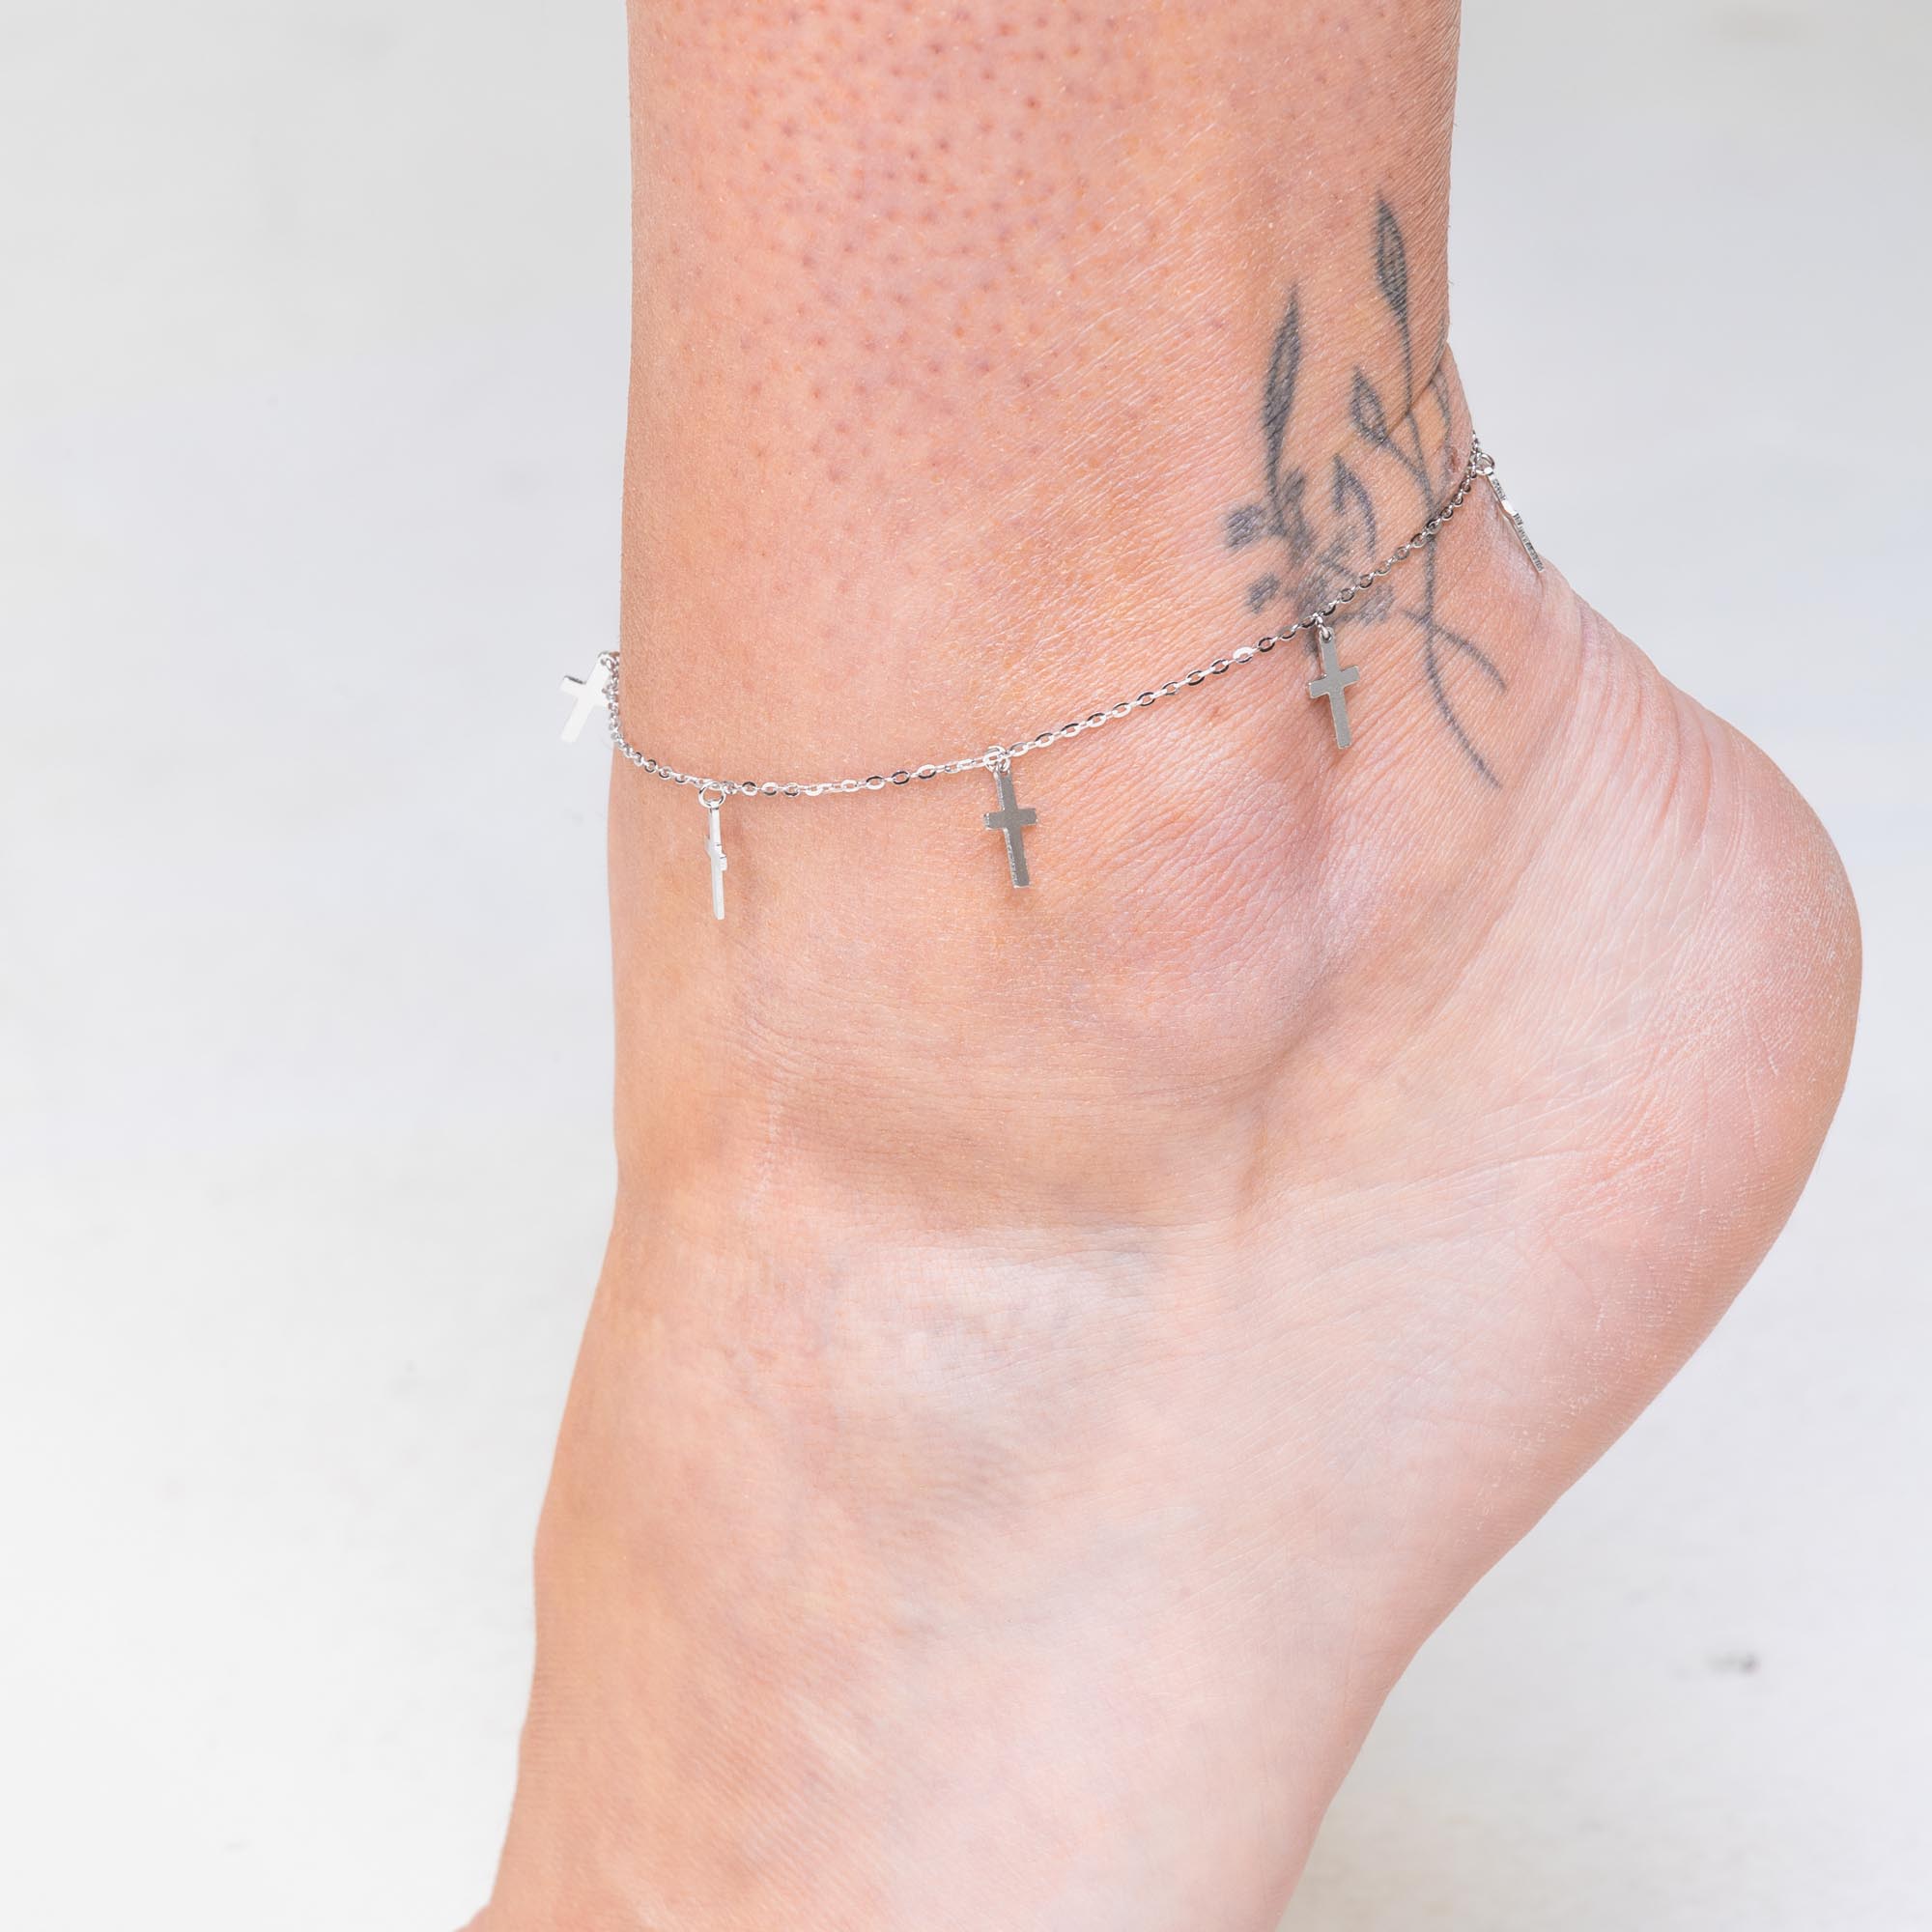 Cross Dangling Chain Anklet